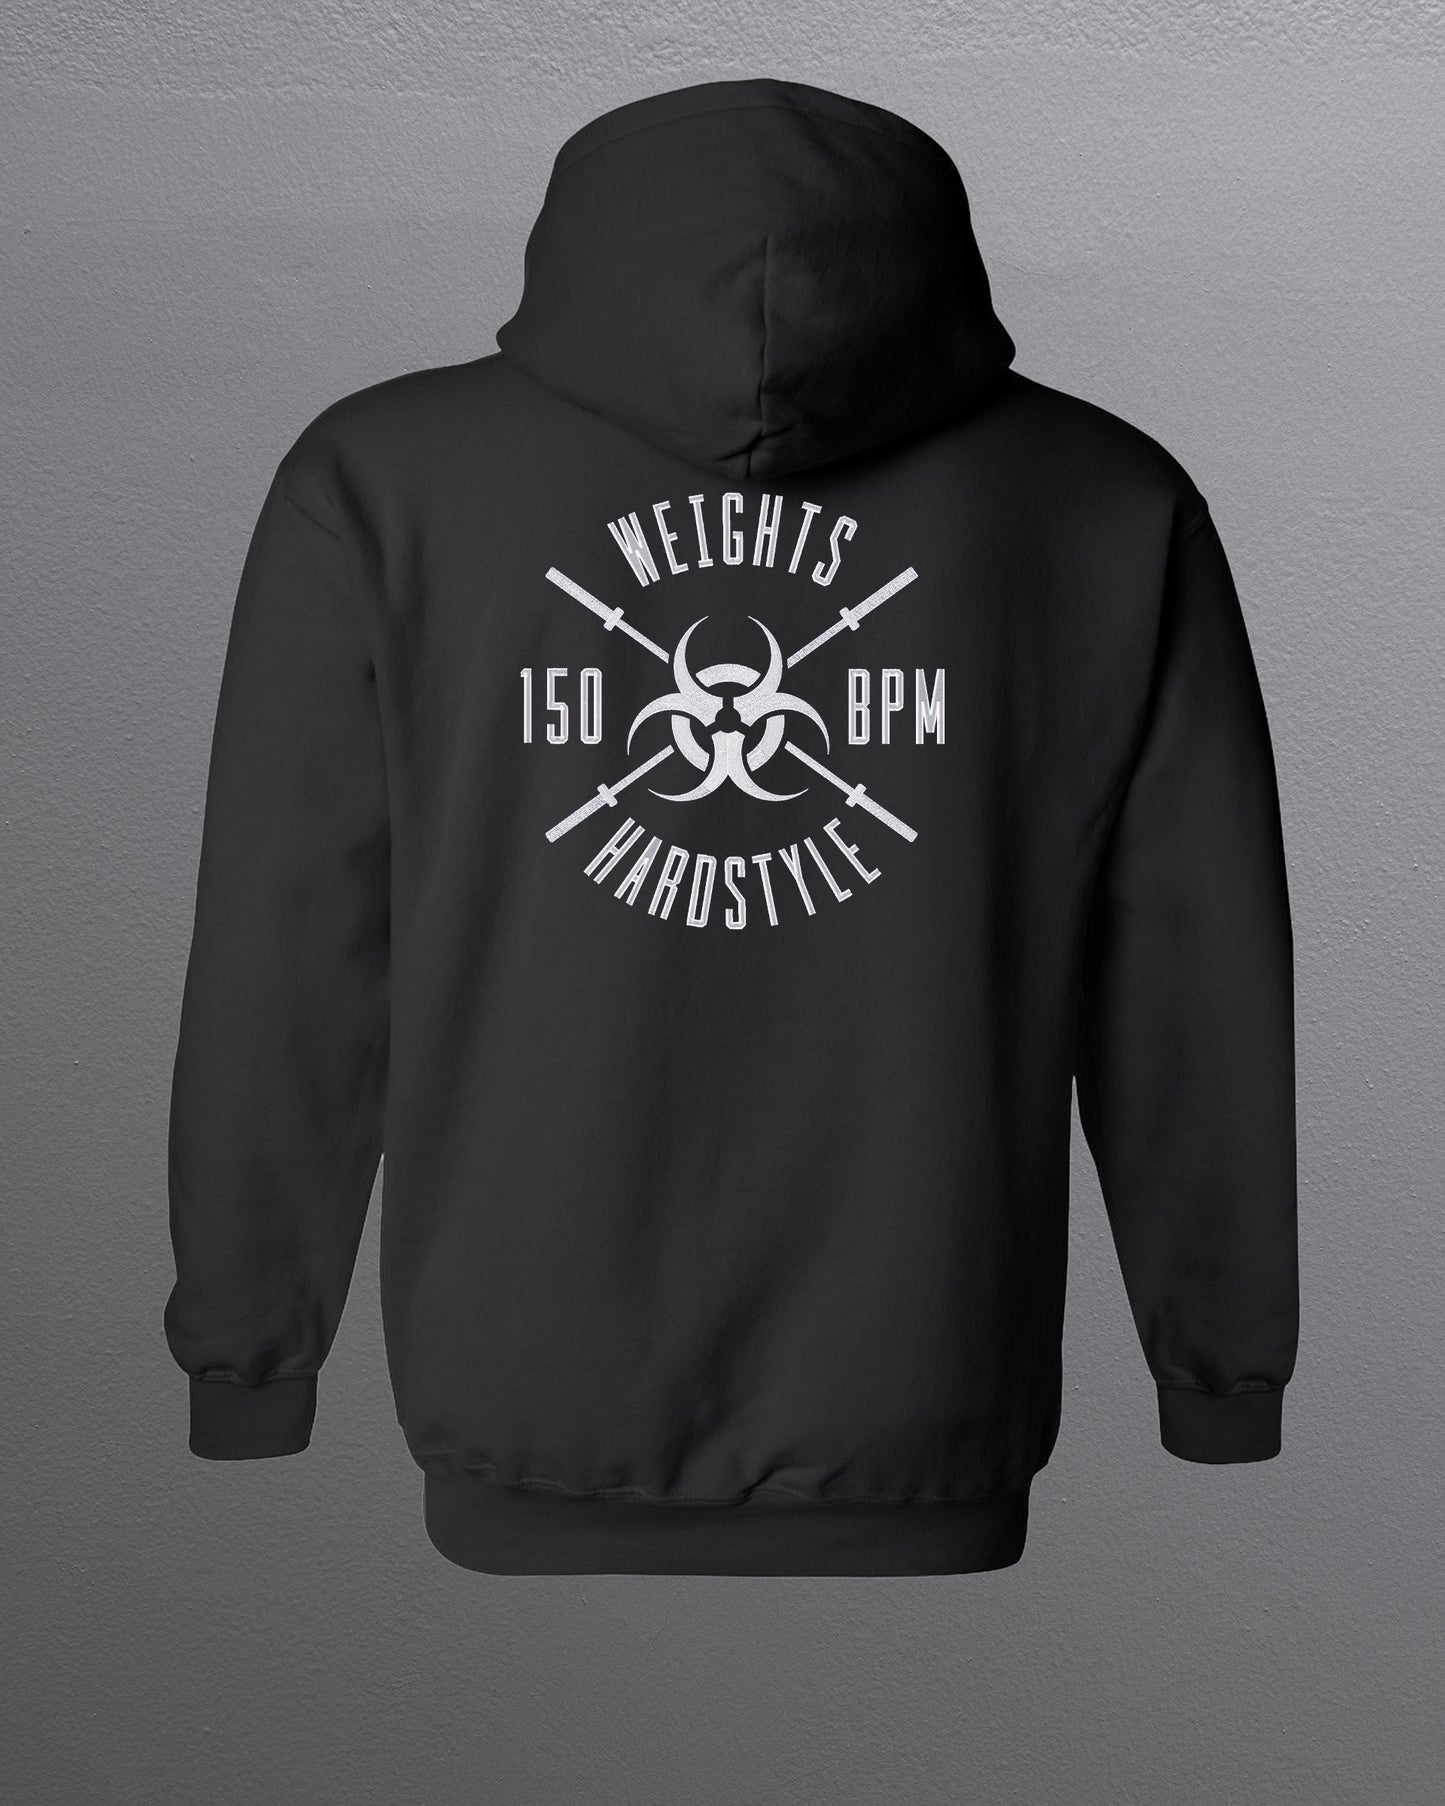 Weights and Hardstyle 2.0 Embroidered Hoodie